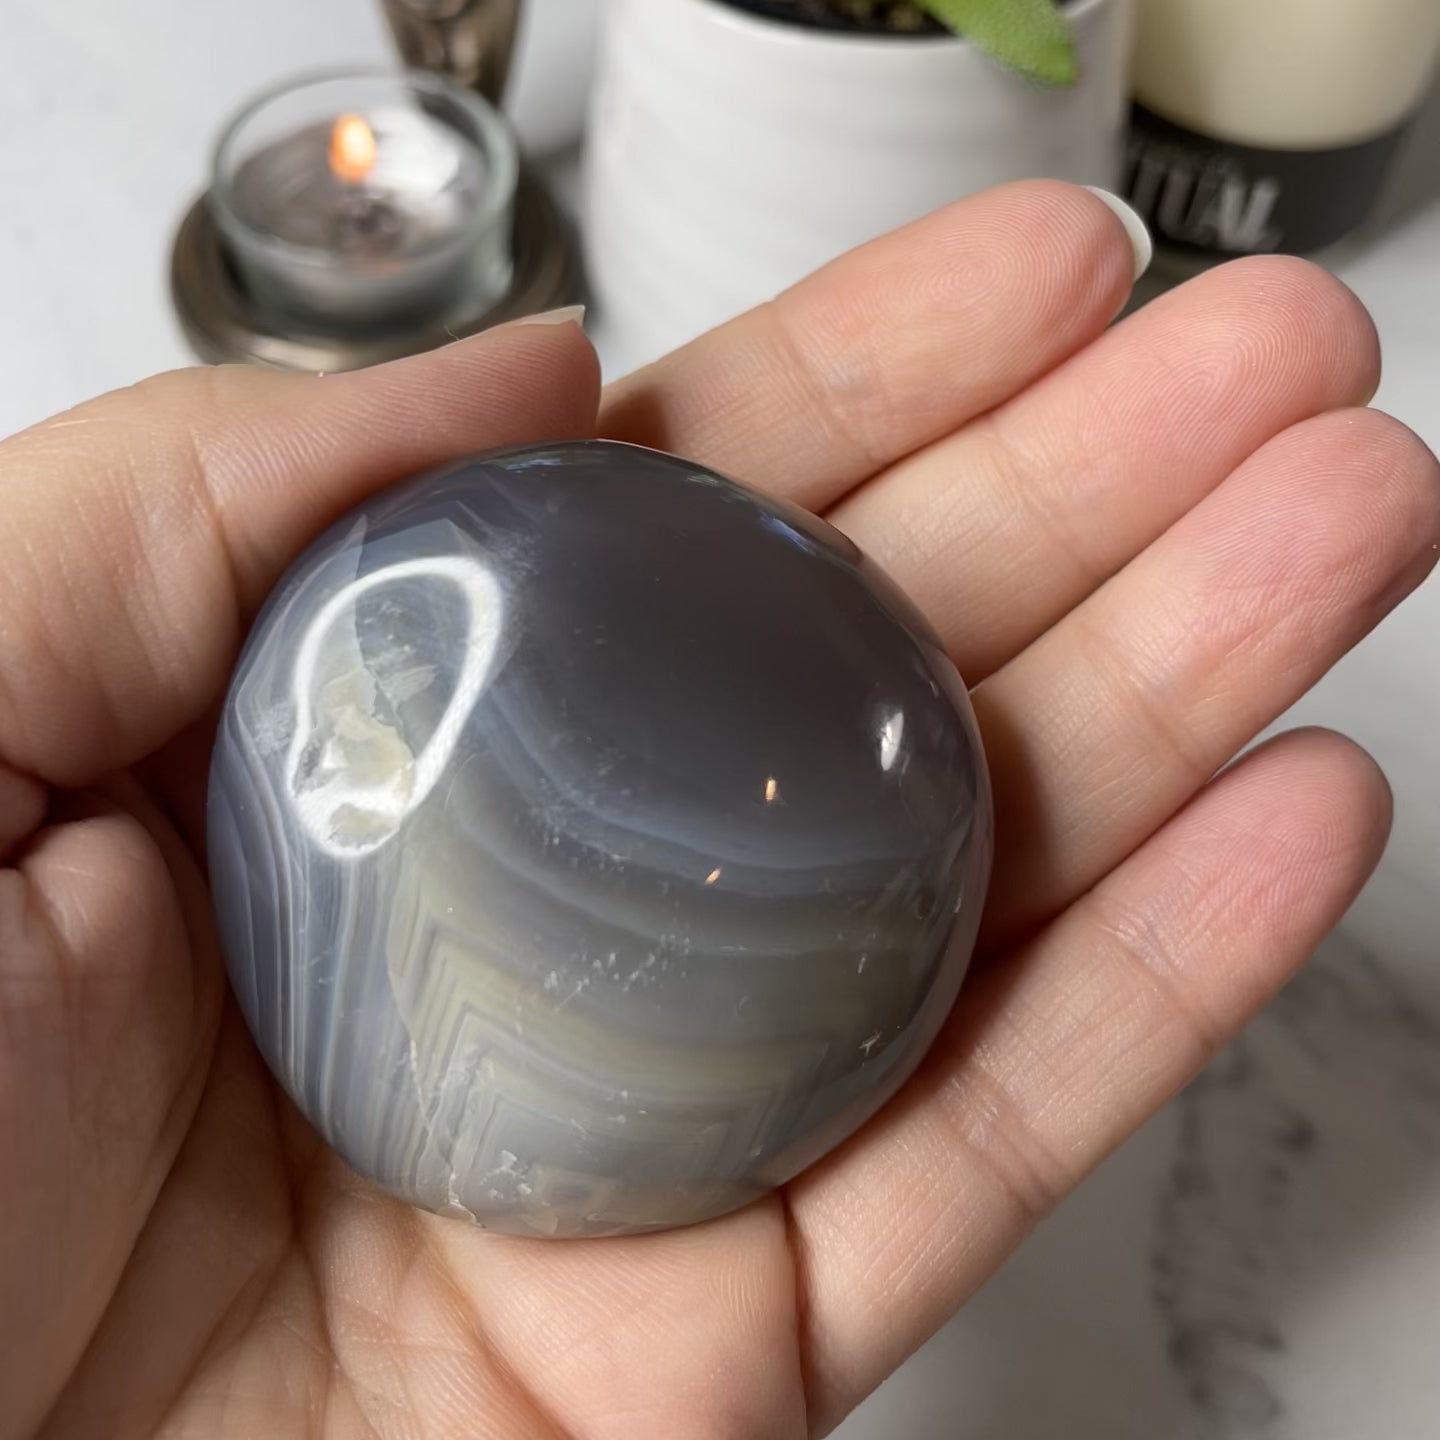 Freya's Haven | Metaphysical & Crystal shop | Three blue and white banded palm stones of Orca Agate are stacked in a white Selenite bowl on a white marble tile. There are candles and a pot in the background.